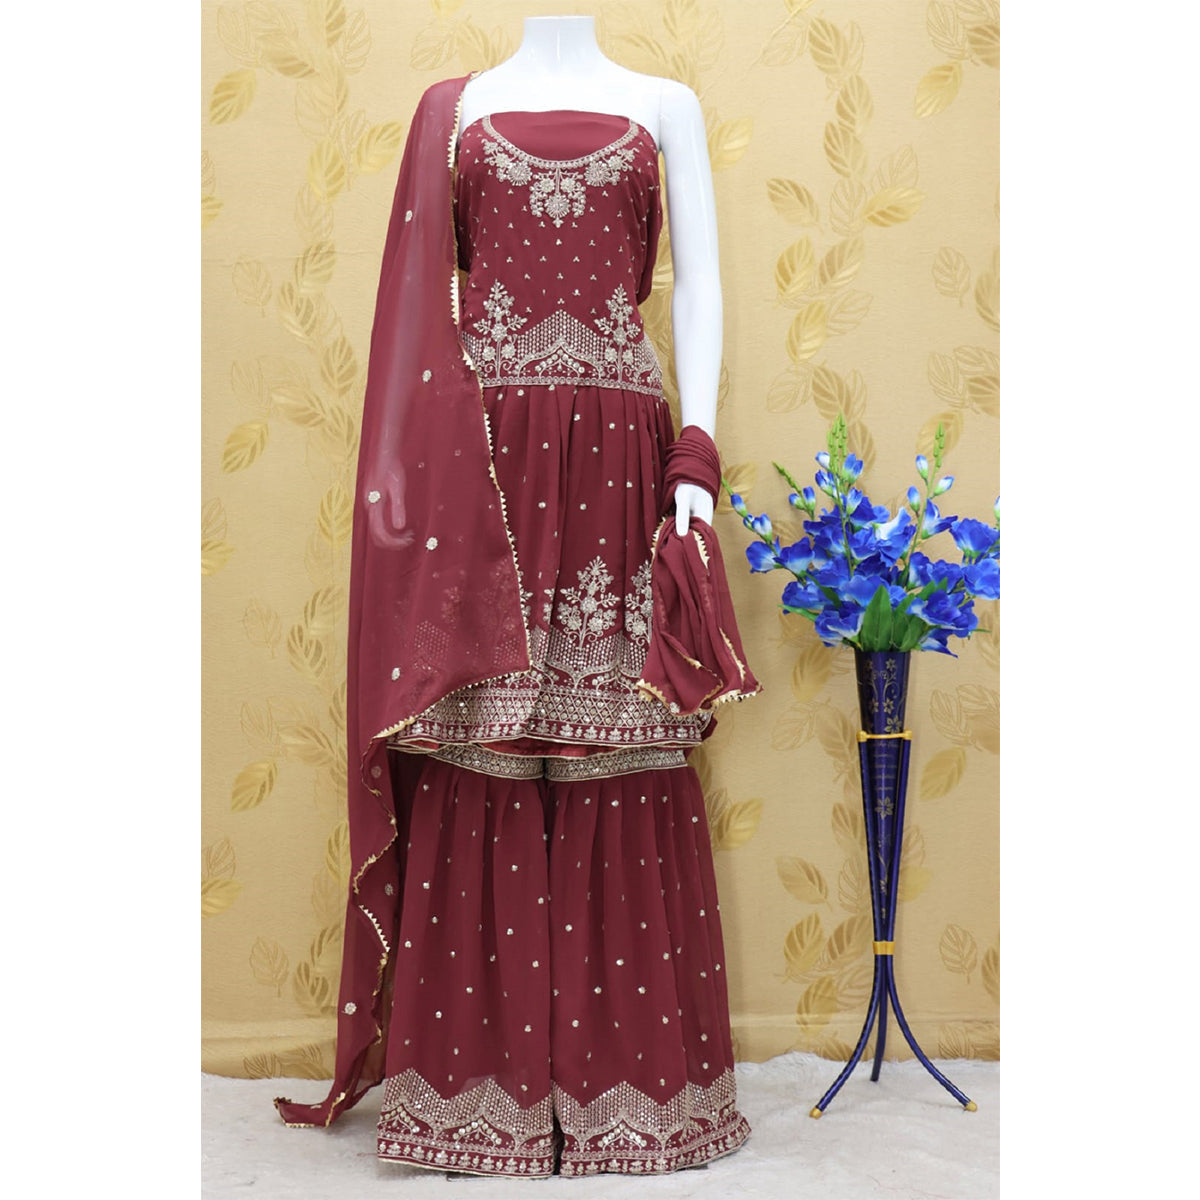 Shafnufab Heavy Faux Georgette Semi Stitched Plazzo Suit In Maroon Colour